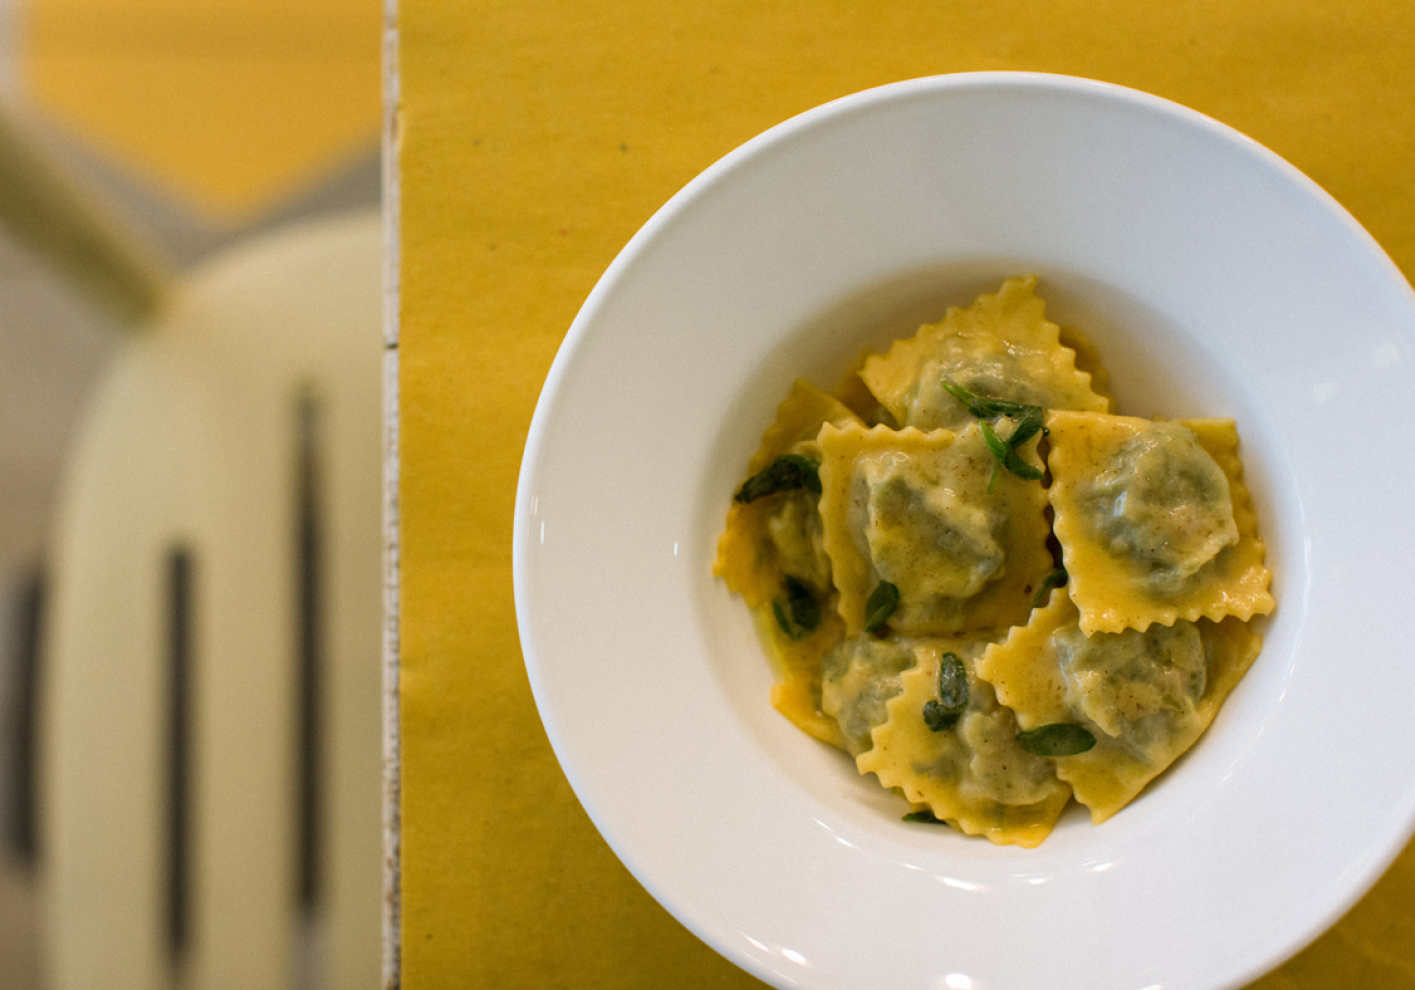 Burro e Salvia is known for its exquisite pasta and fun pasta making classes